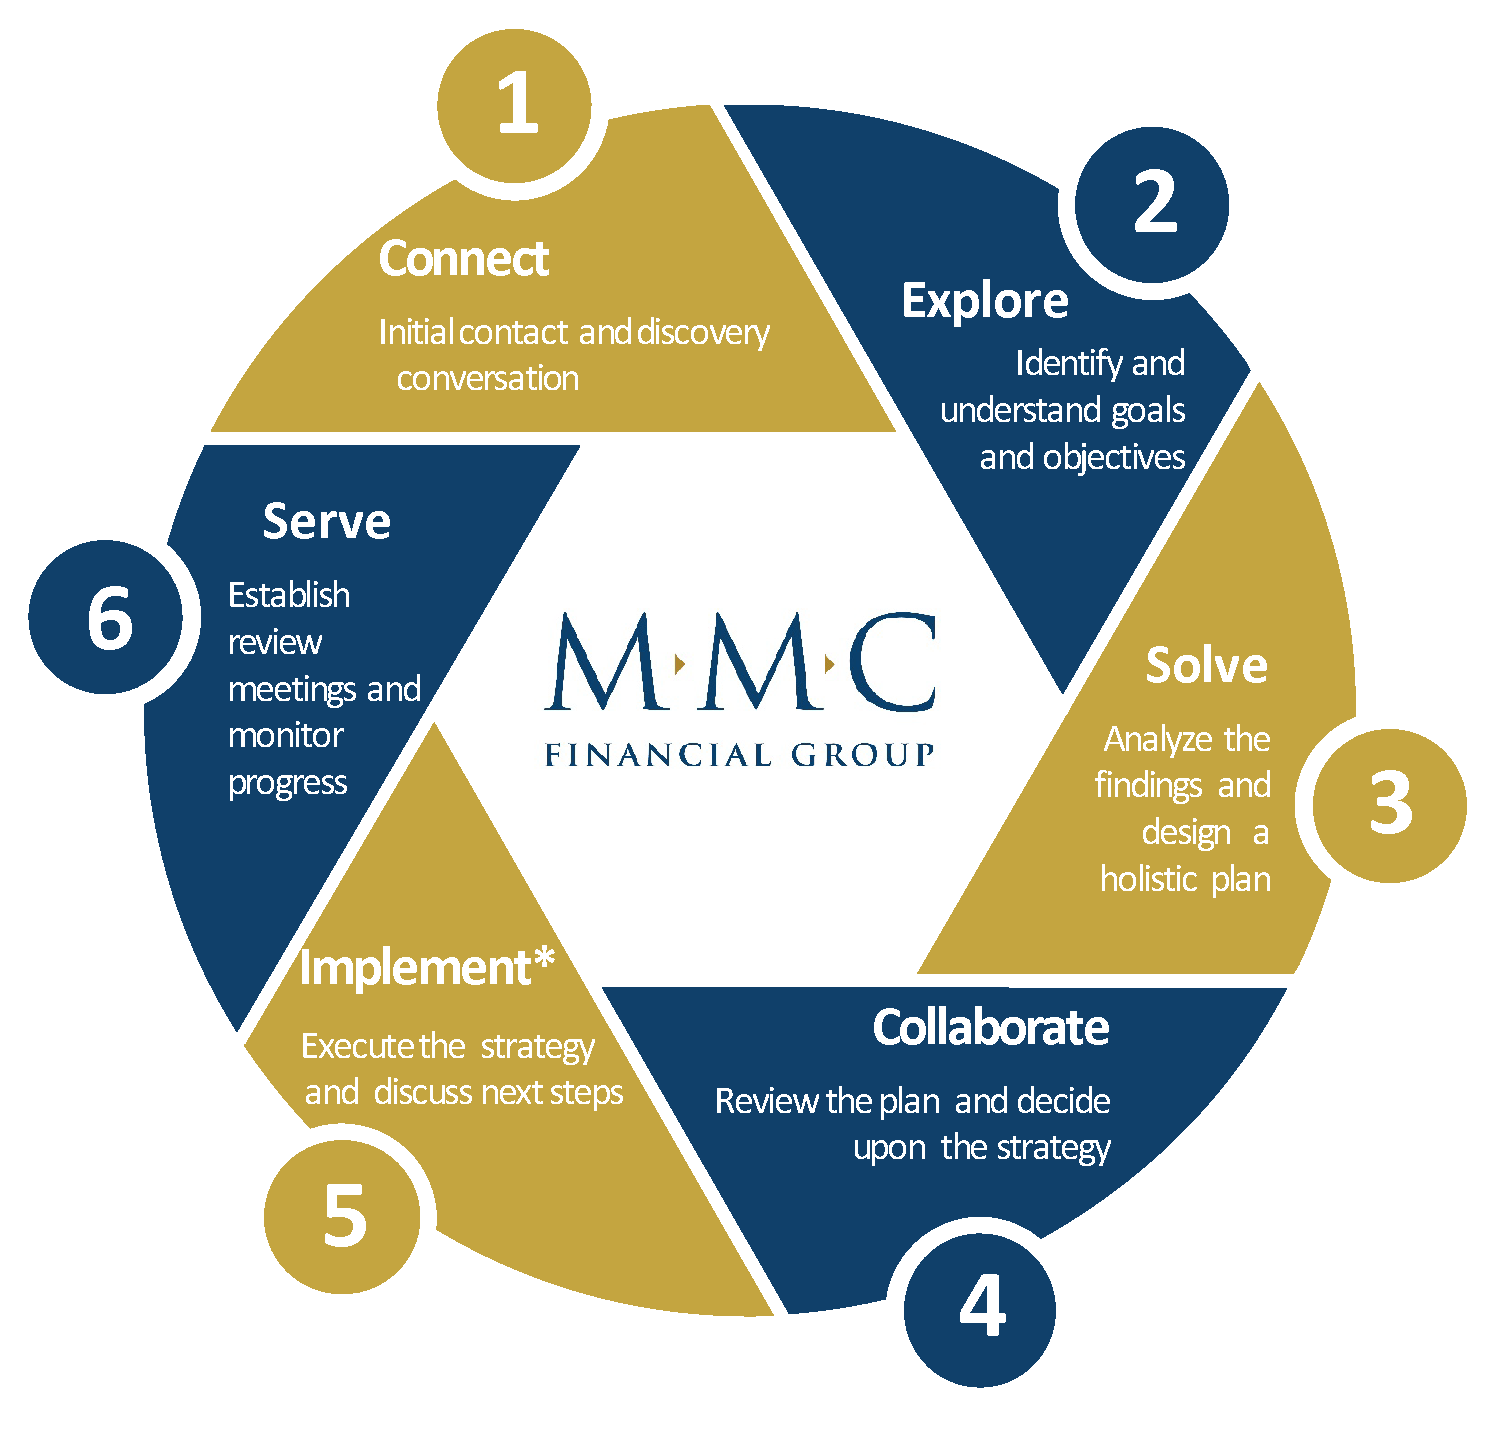 MMC Financial Group – Planning for 2100 and beyond